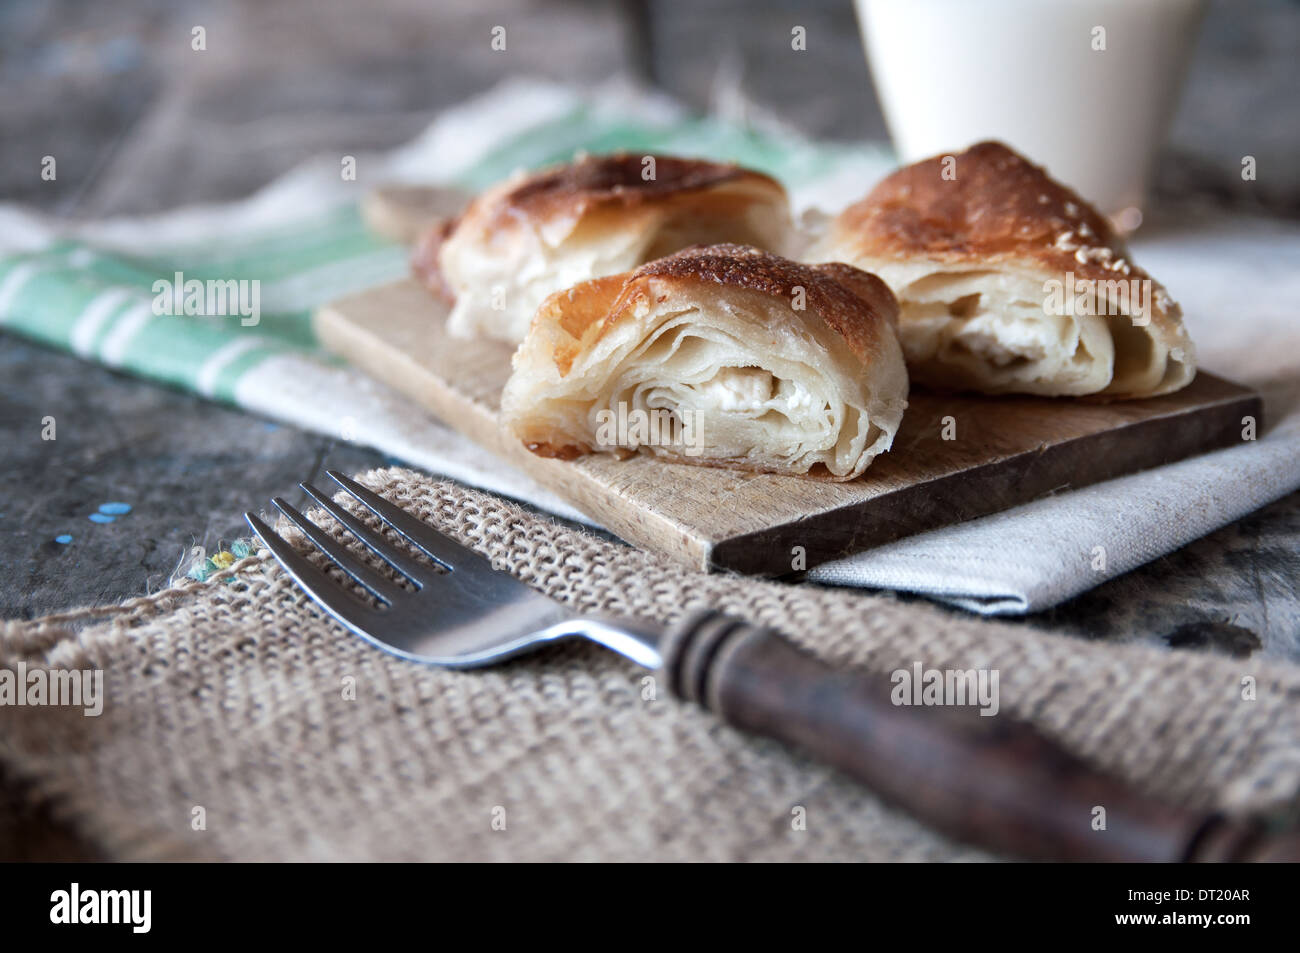 homemade cheese pie on table, natural light Stock Photo